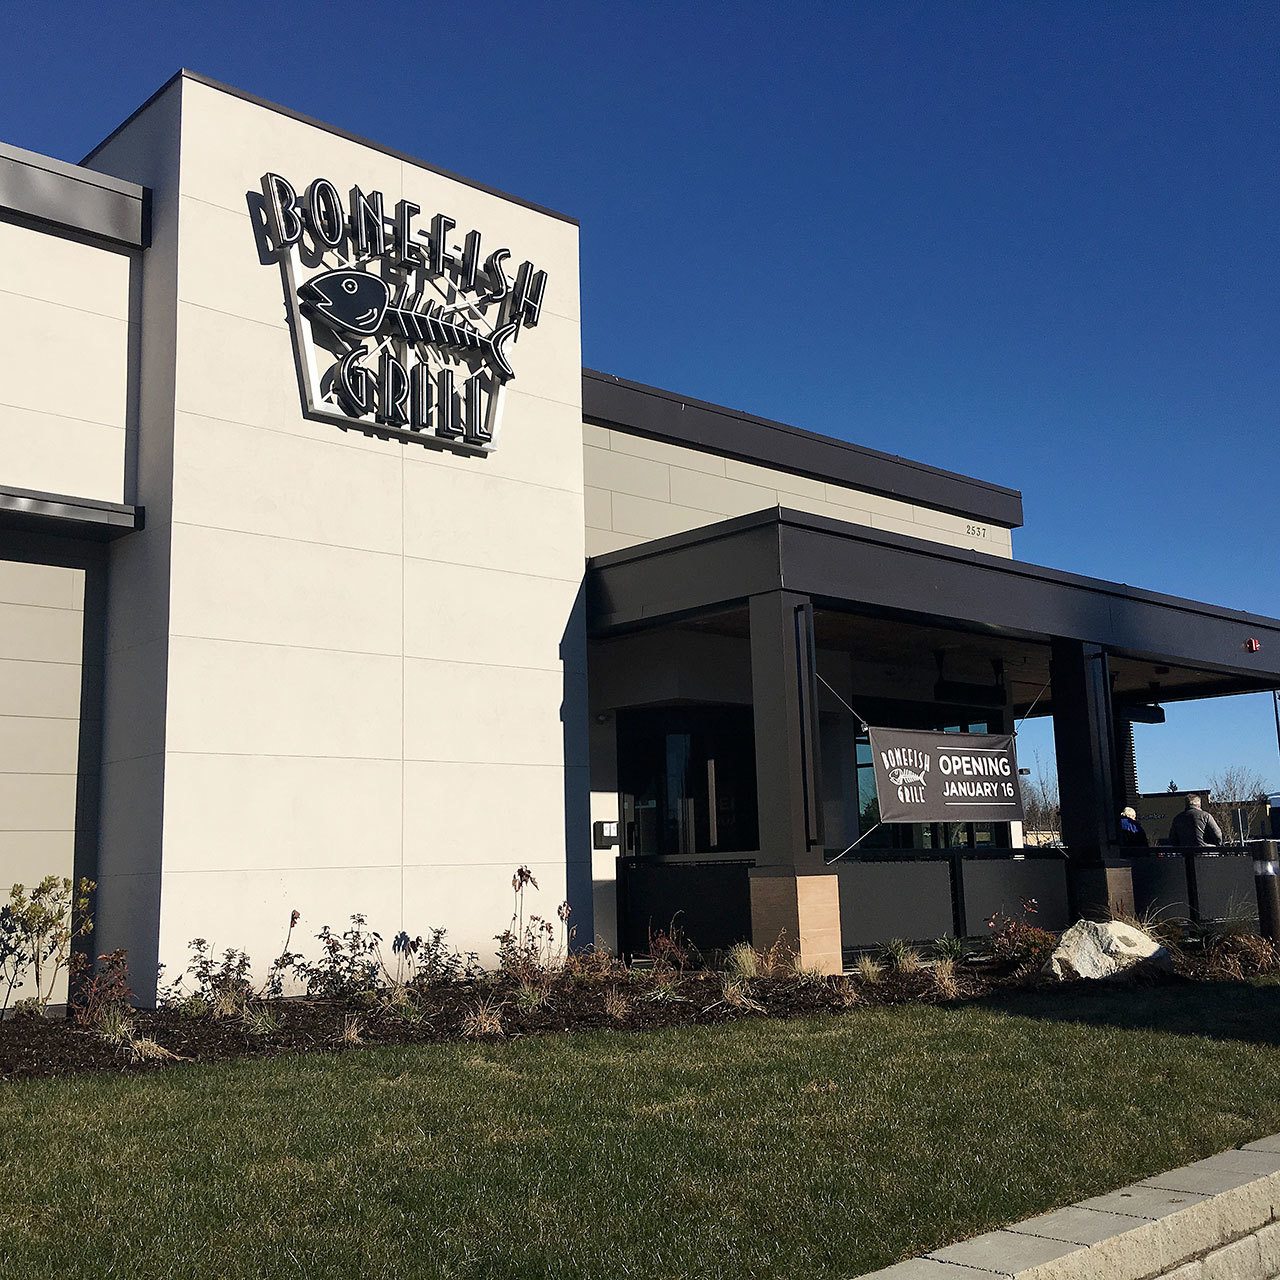 Bonefish Grill opened in January in north Marysville. It is connected to the Outback Steakhouse, which is owned by the same chain. (Jim Davis / HBJ)